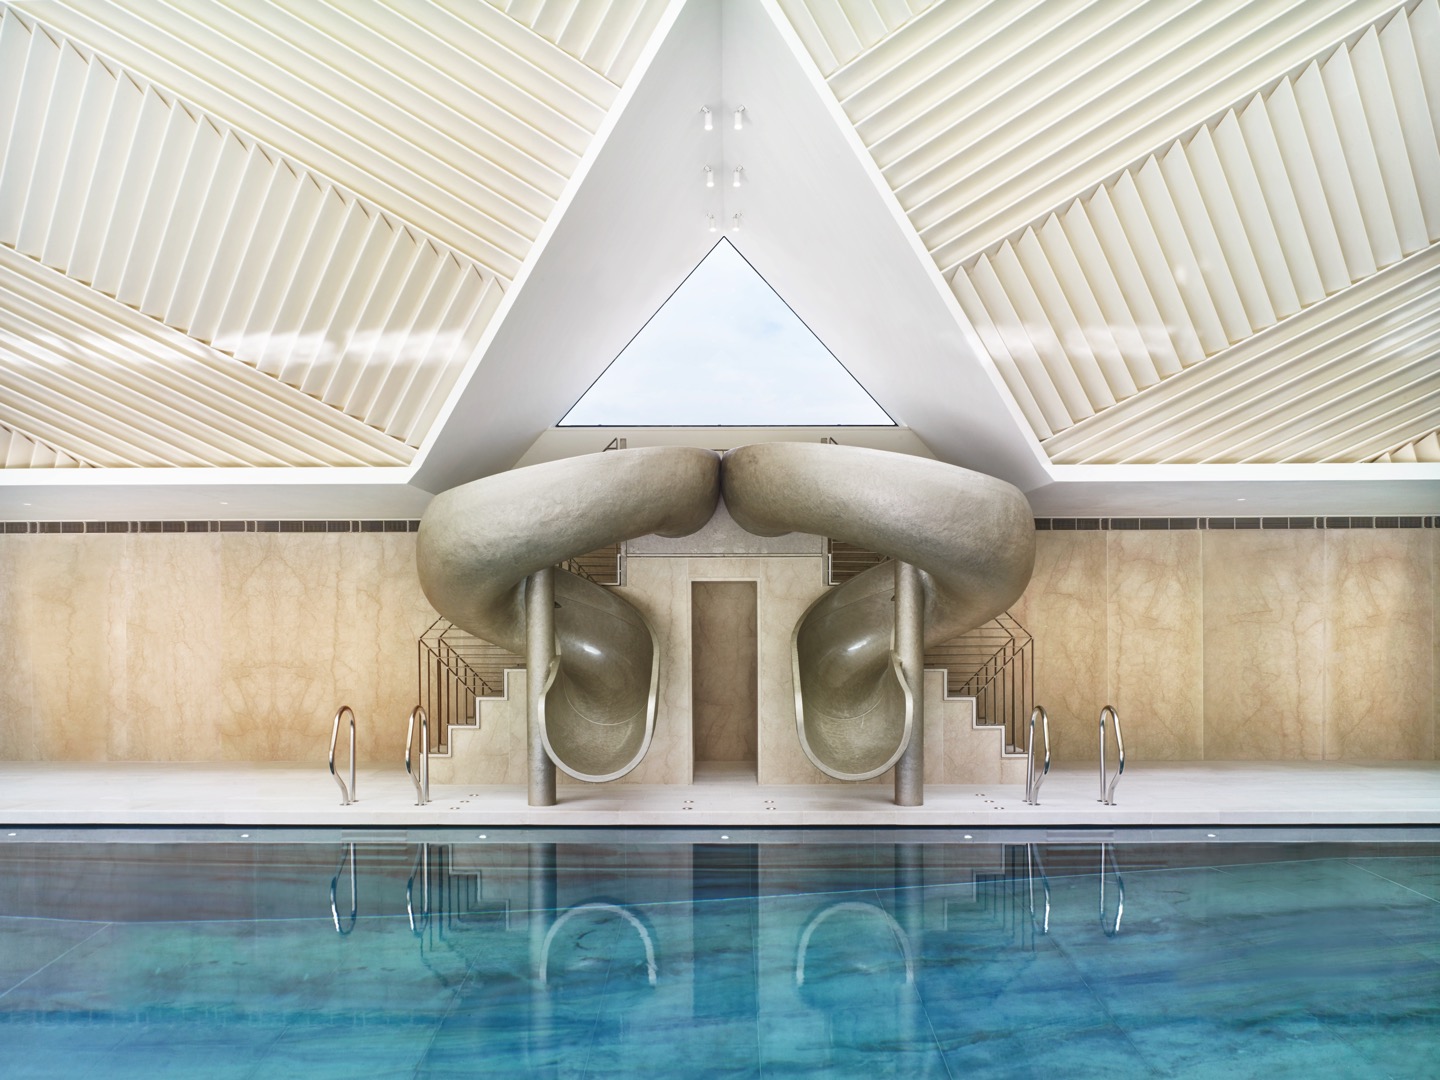 Double pool slide by Splinterworks in spectacularly designed pool pavilion.